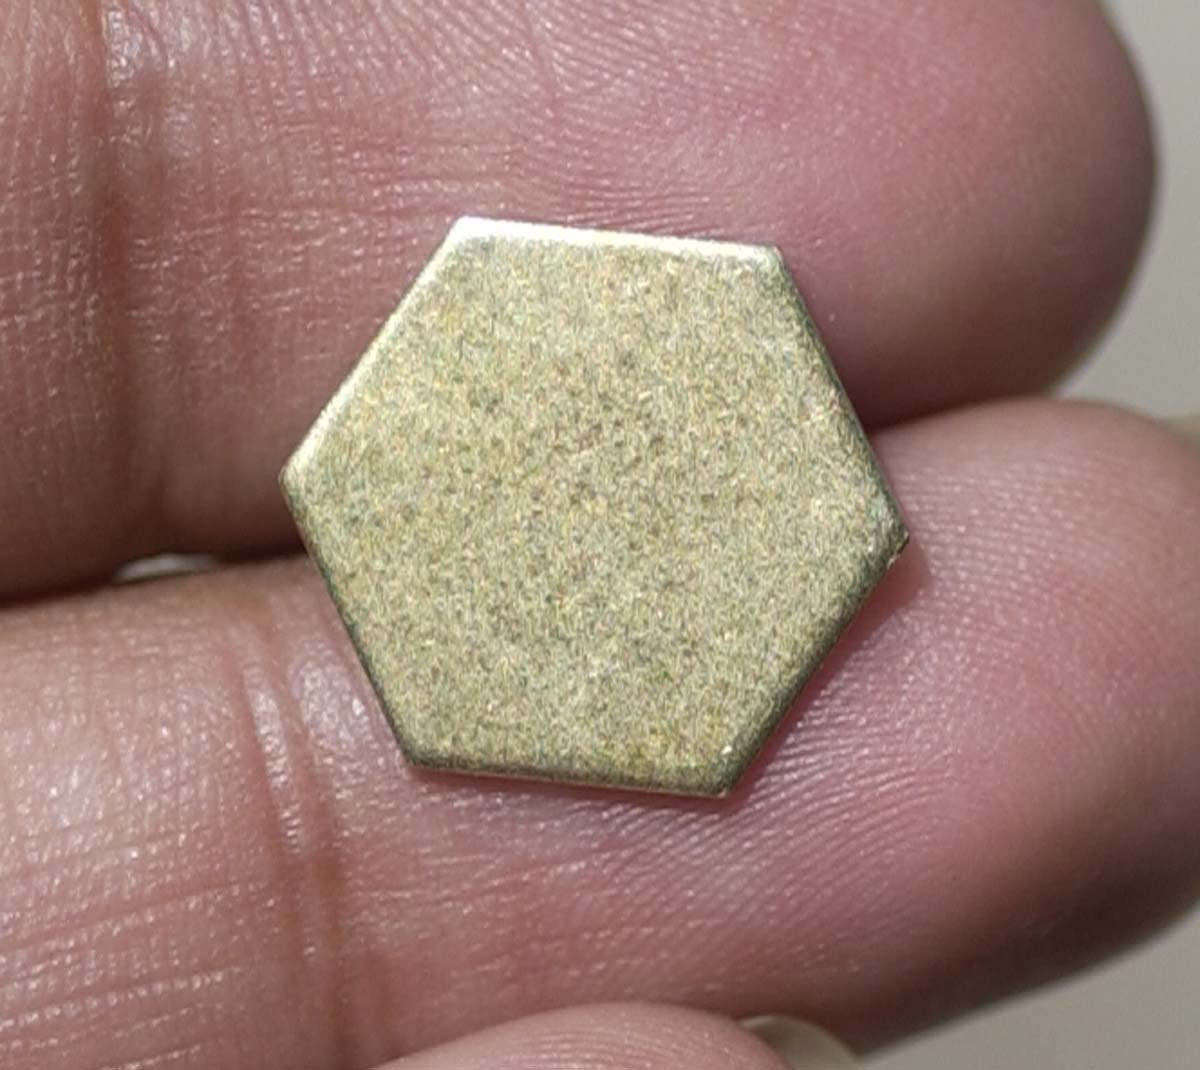 Brass Hexagon 20g 12mm Blanks Cutout for Metalworking Stamping Texturing Blanks - 6 pieces